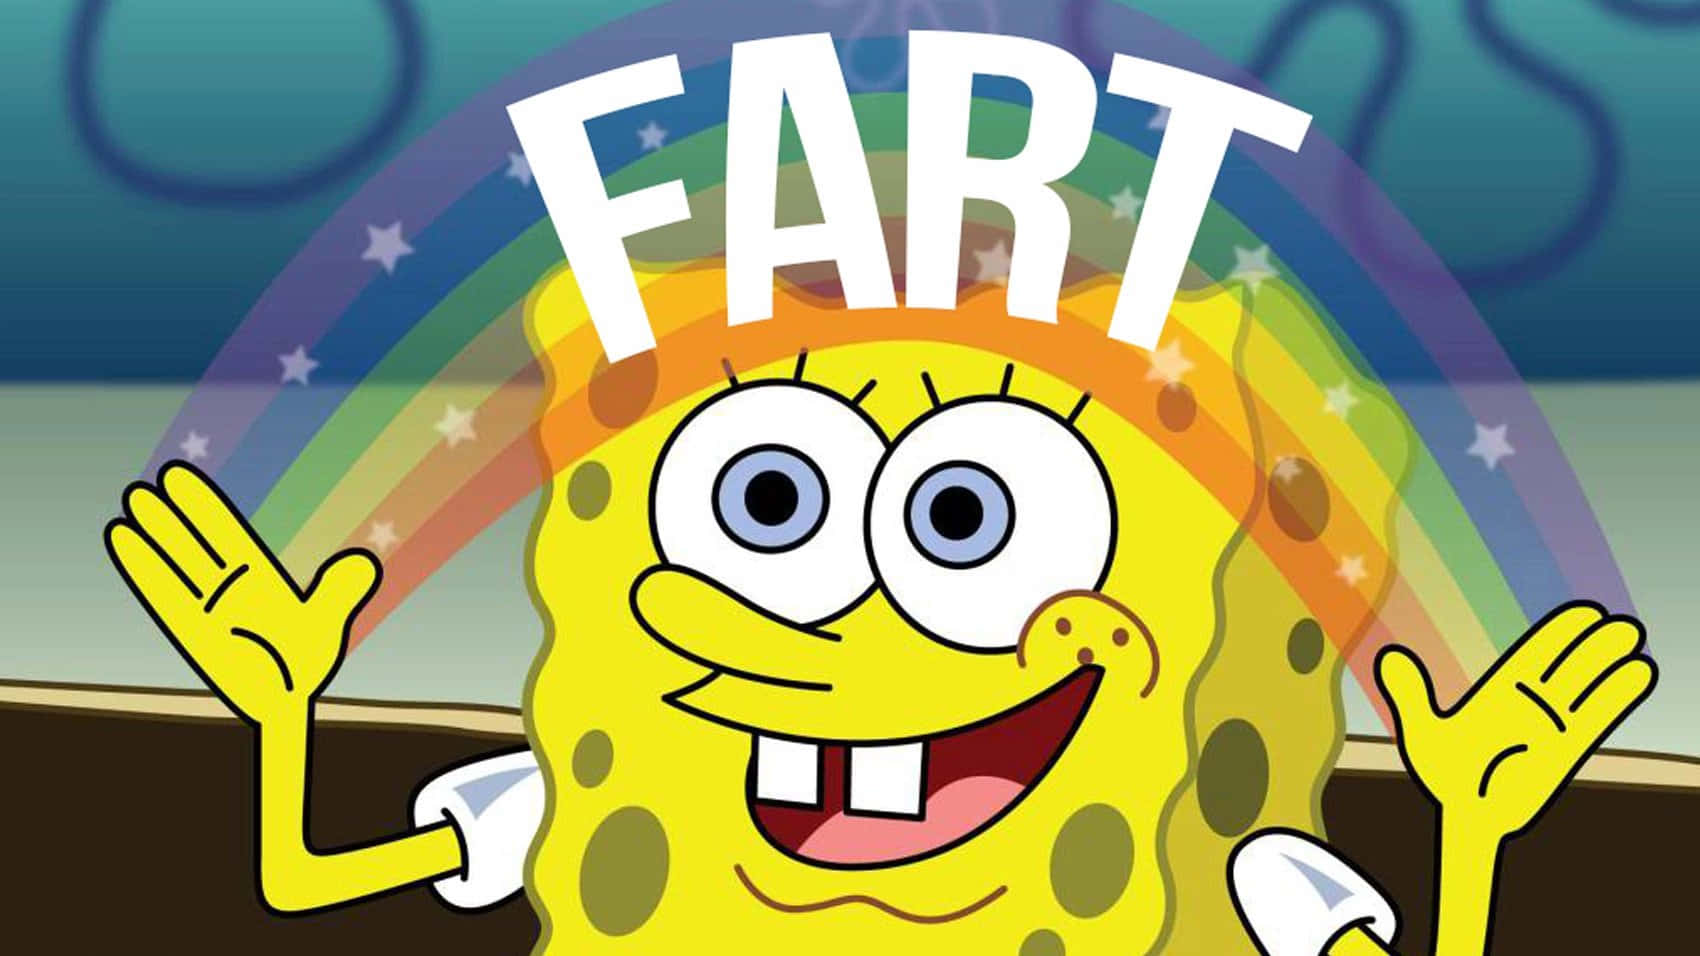 "A fun and humorous fart illustration"